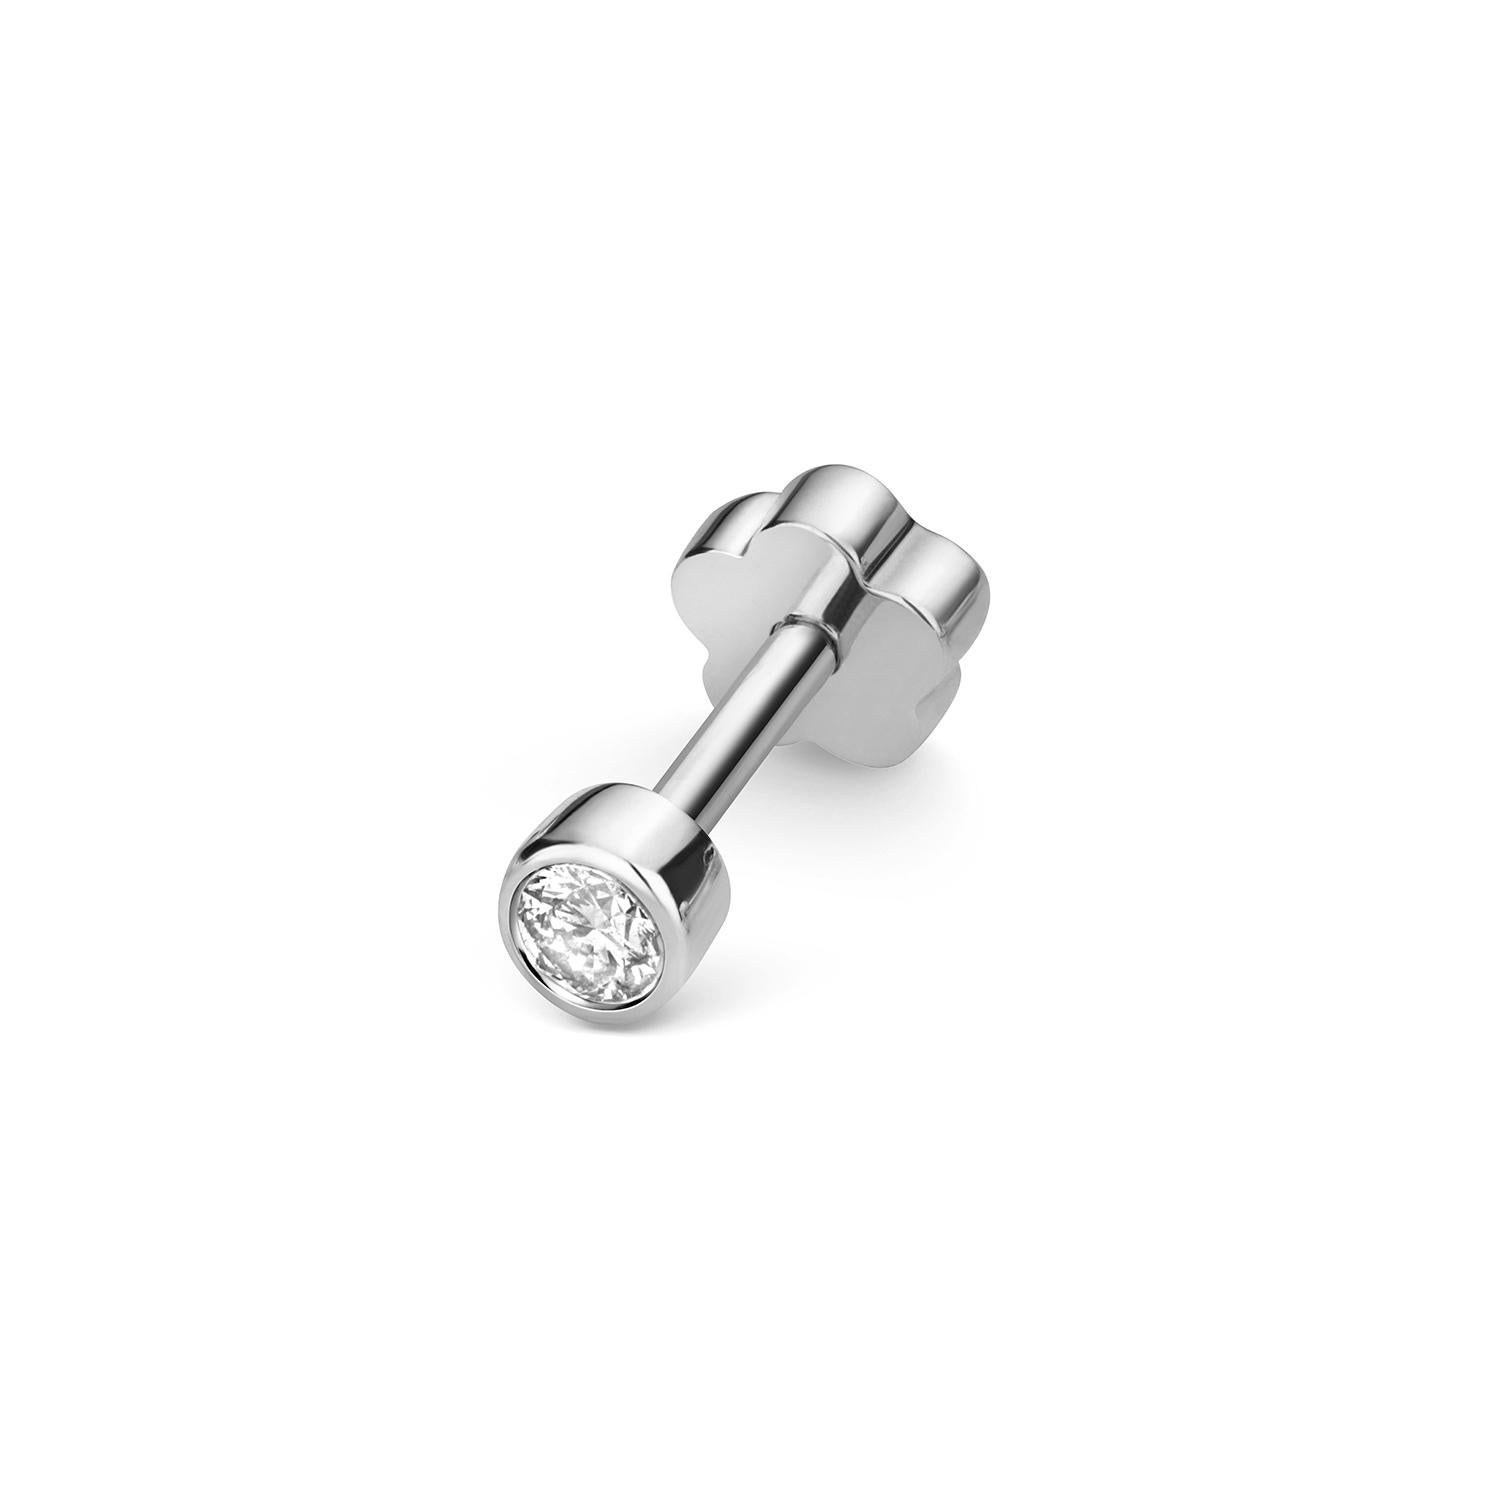 DIAMOND CARTILAGE RUBOVER STUD

9CT

0.05CT

G

SI

Weight: 0.45g

Number Of Stones:1

Total Carates:0.050